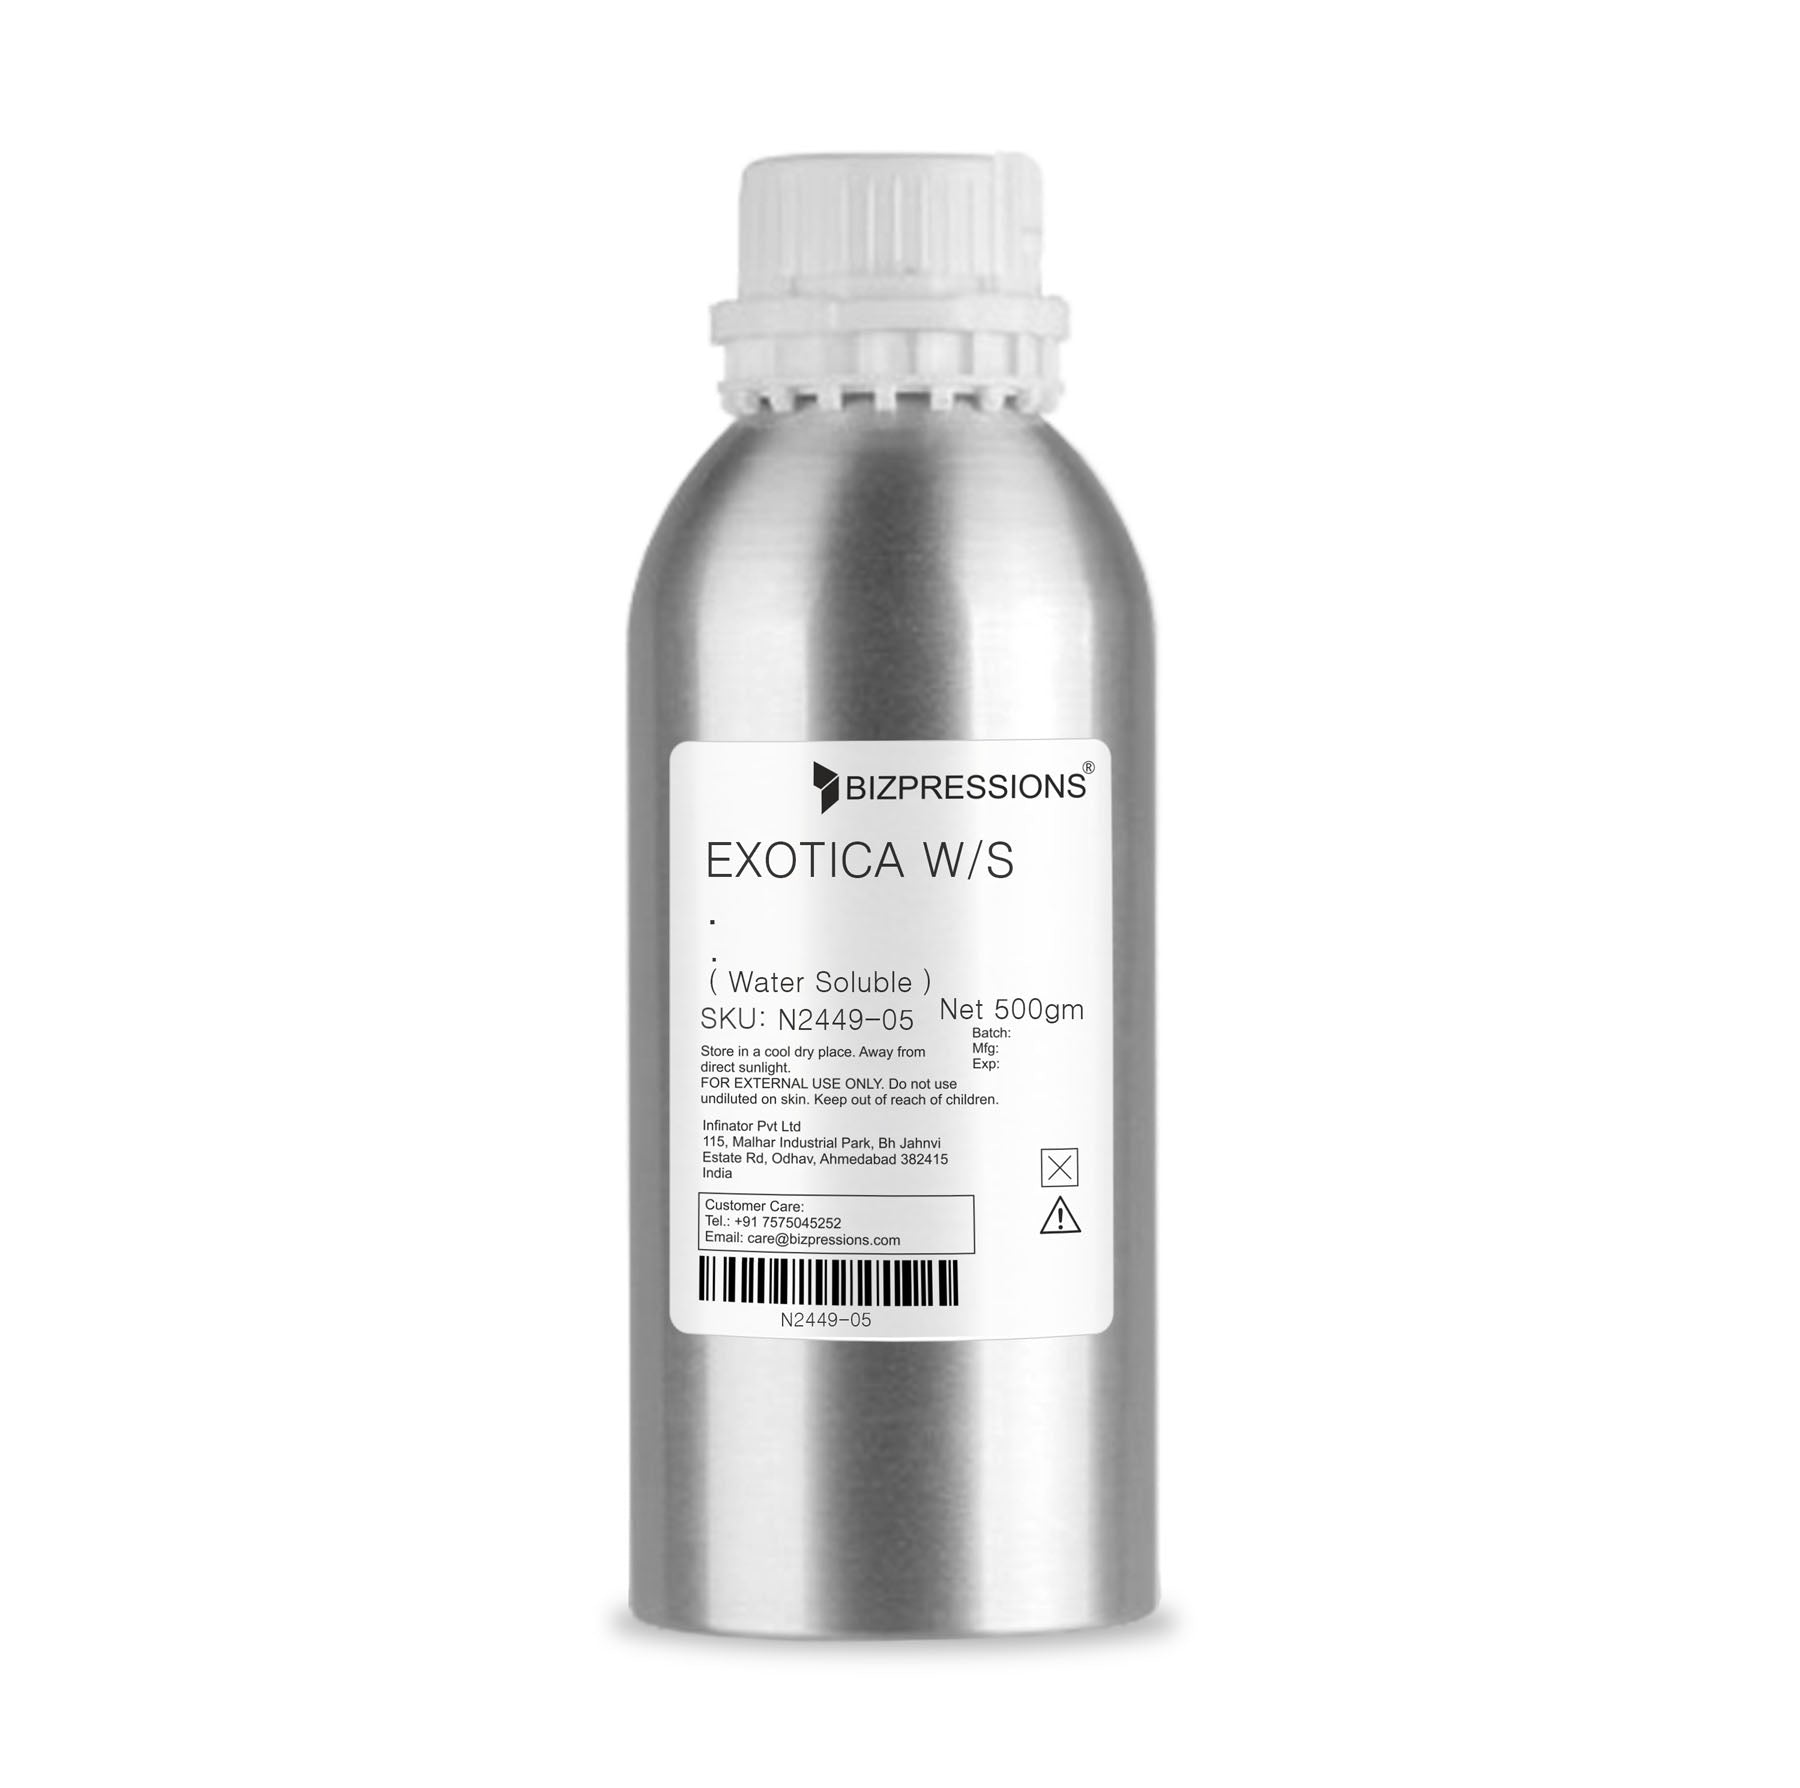 EXOTICA W/S - Fragrance ( Water Soluble ) - 500 gm